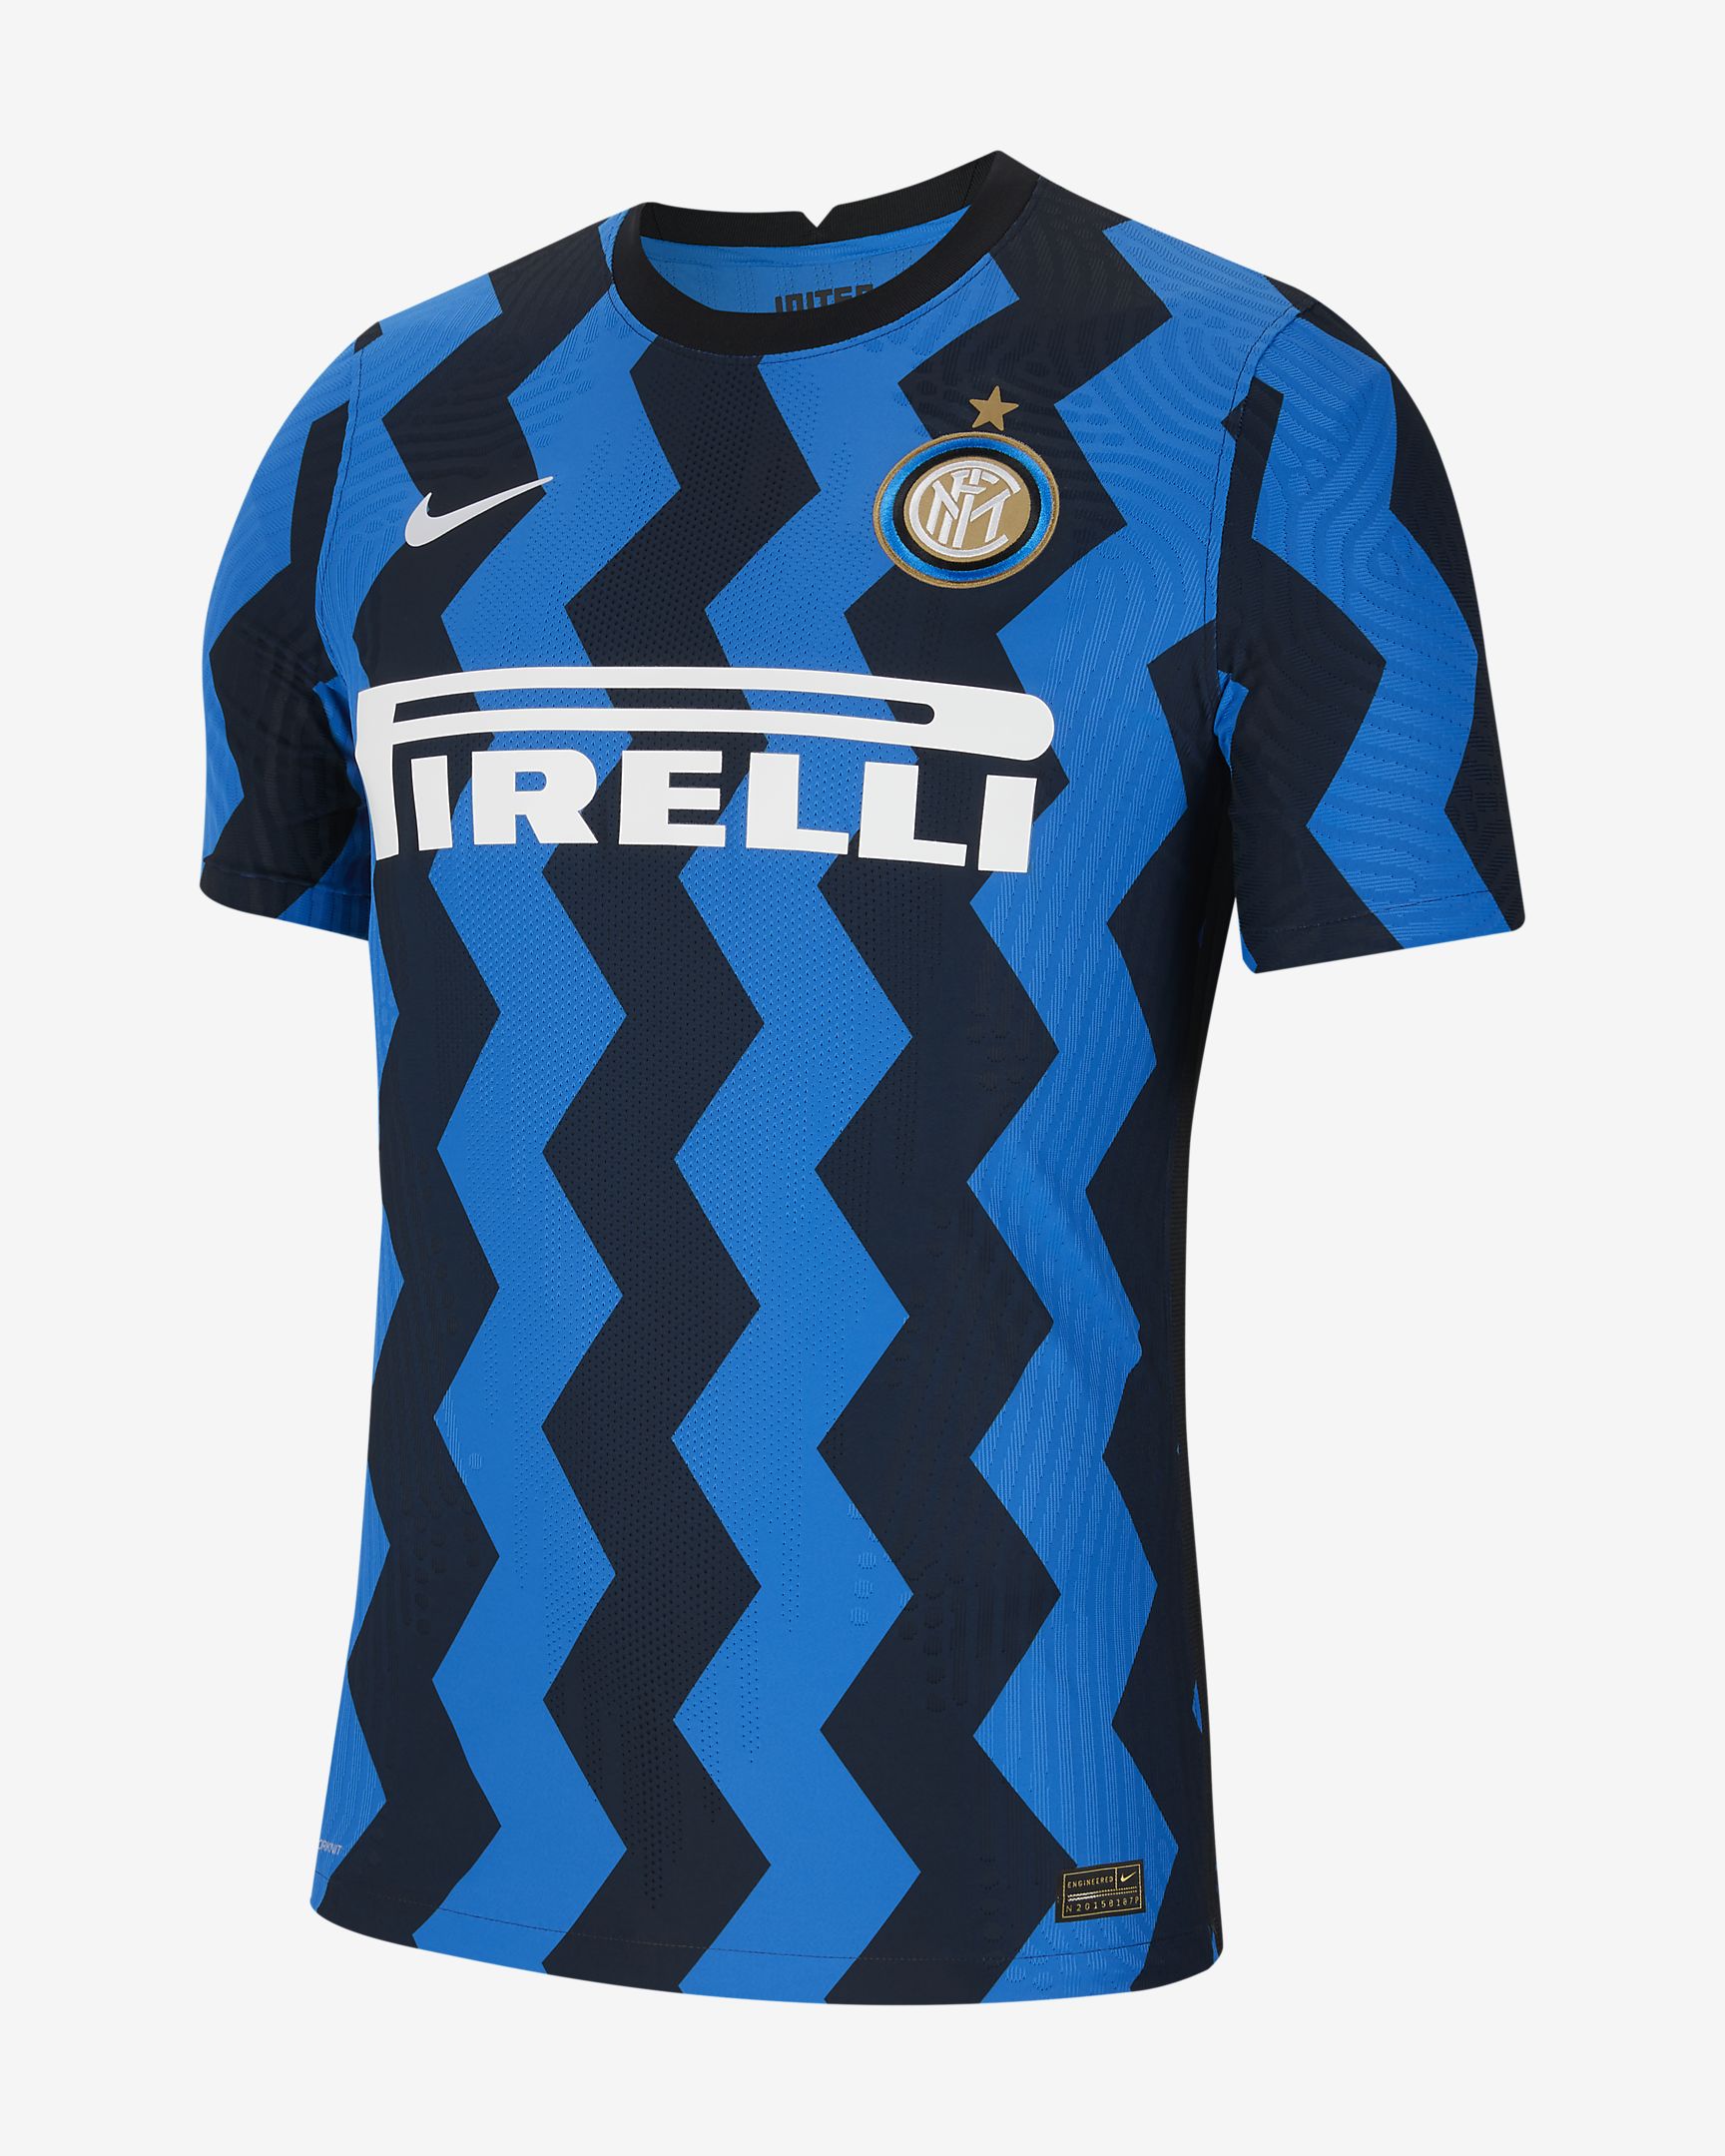 Inter Milan release new kit ahead of 2020/21 season and it's wavy